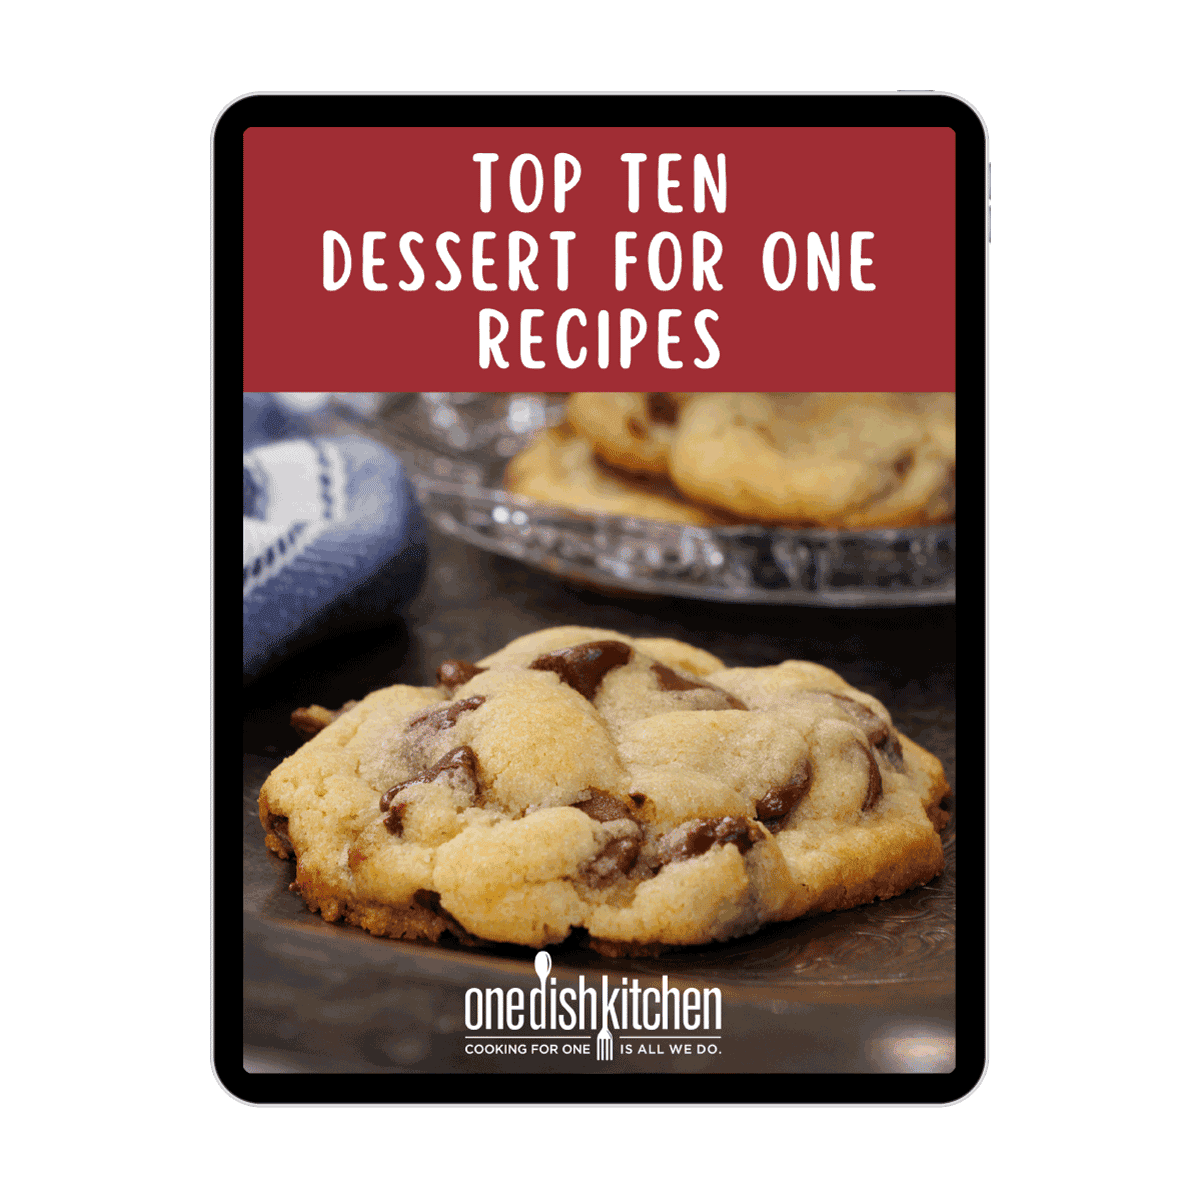 Image of Dessert for One Cookbook cover shown on iPad screen